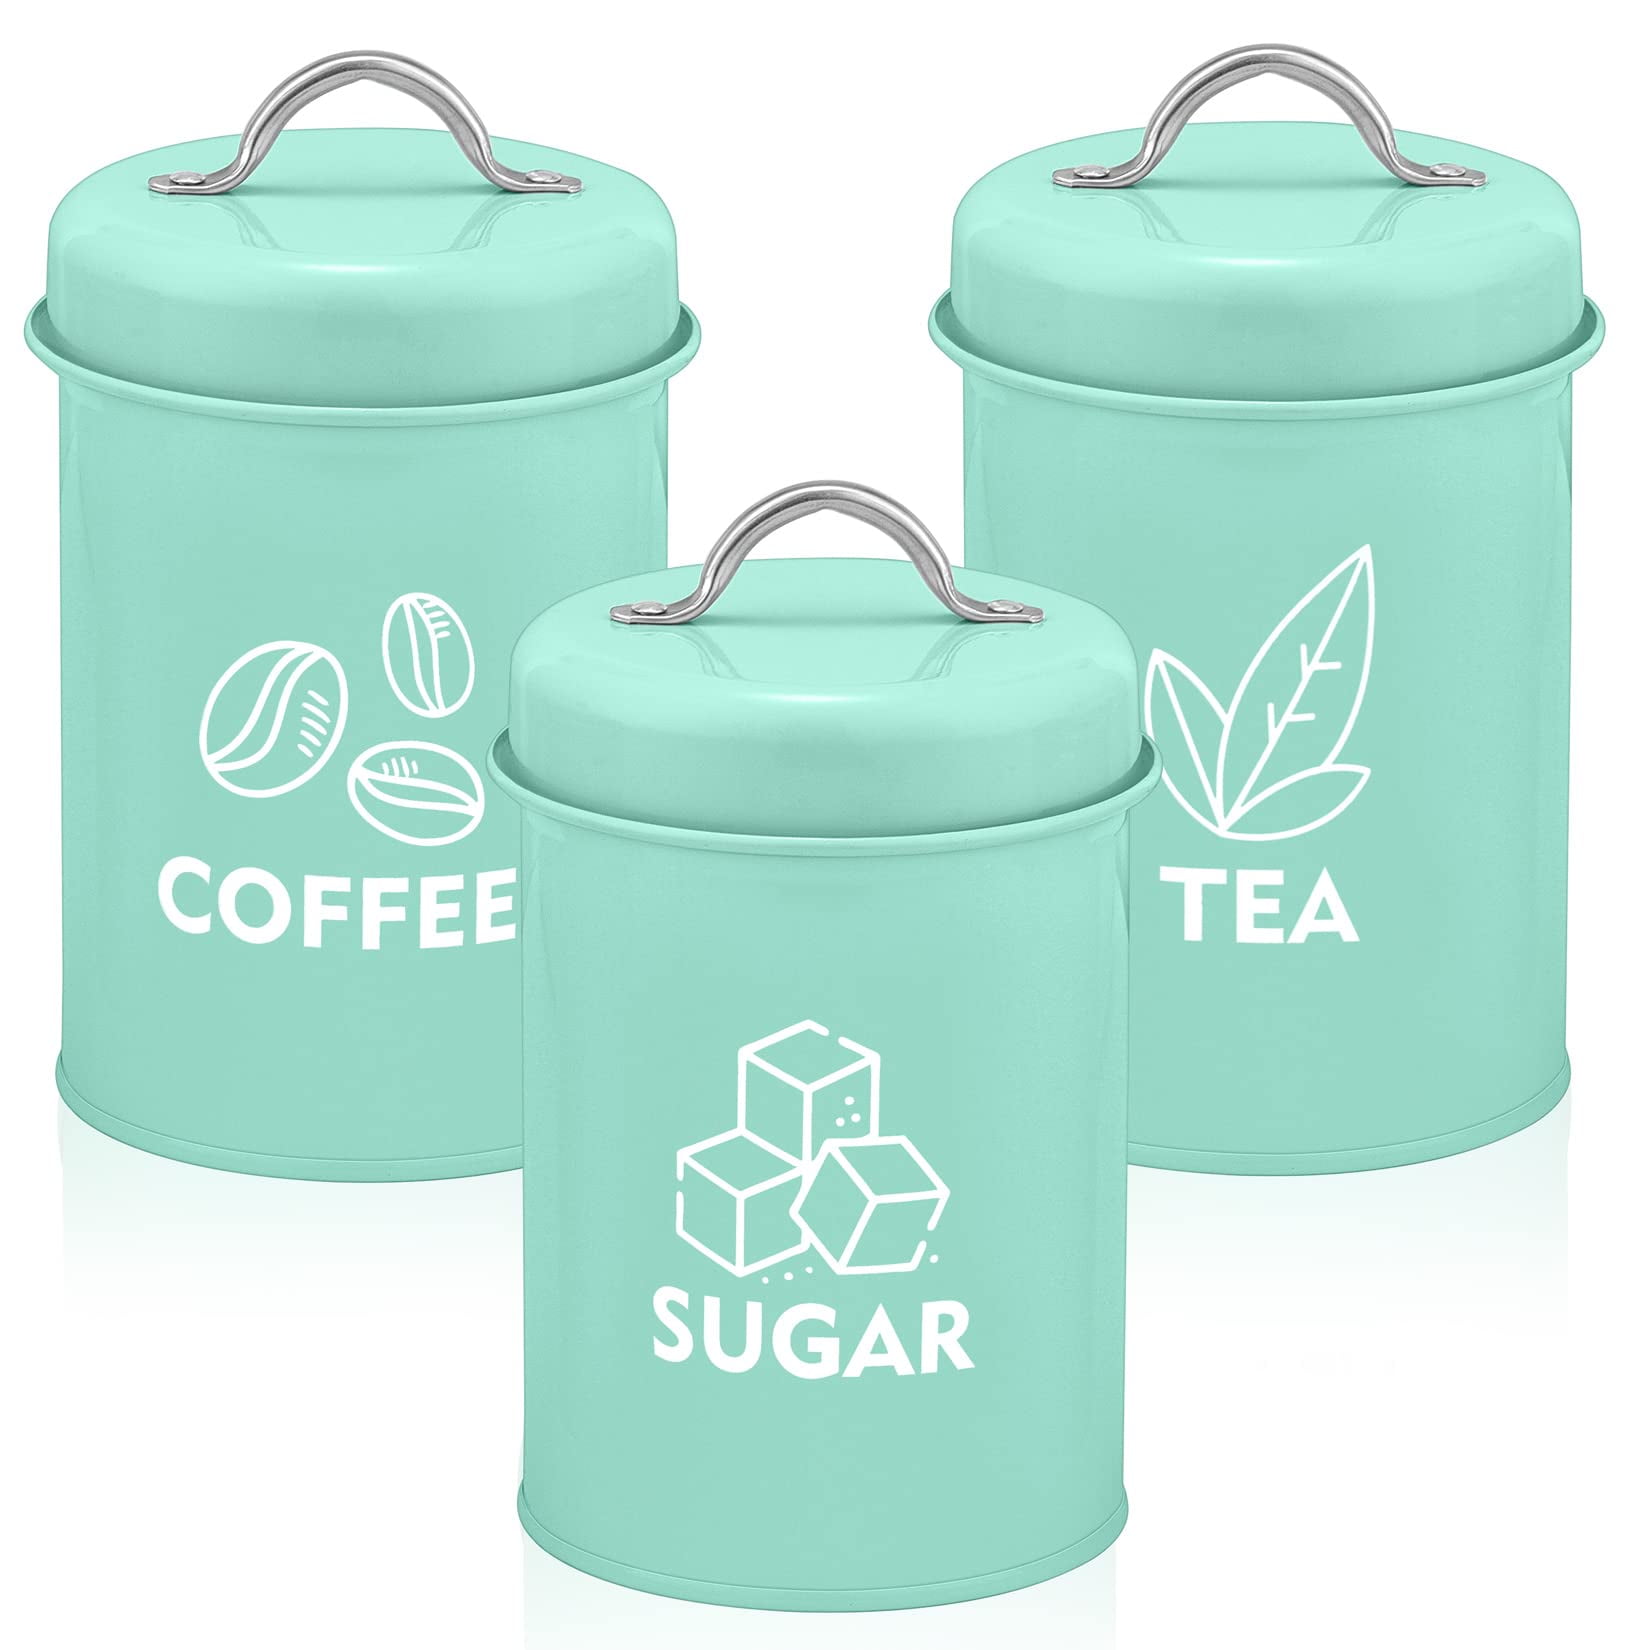 VETIN 3 Pcs Sugar Salt Container Set Containers for Sugar and Coffee Sugar  Container Marble Jar Set Sugar Bowl Sugar Jar with Spoon and Lid